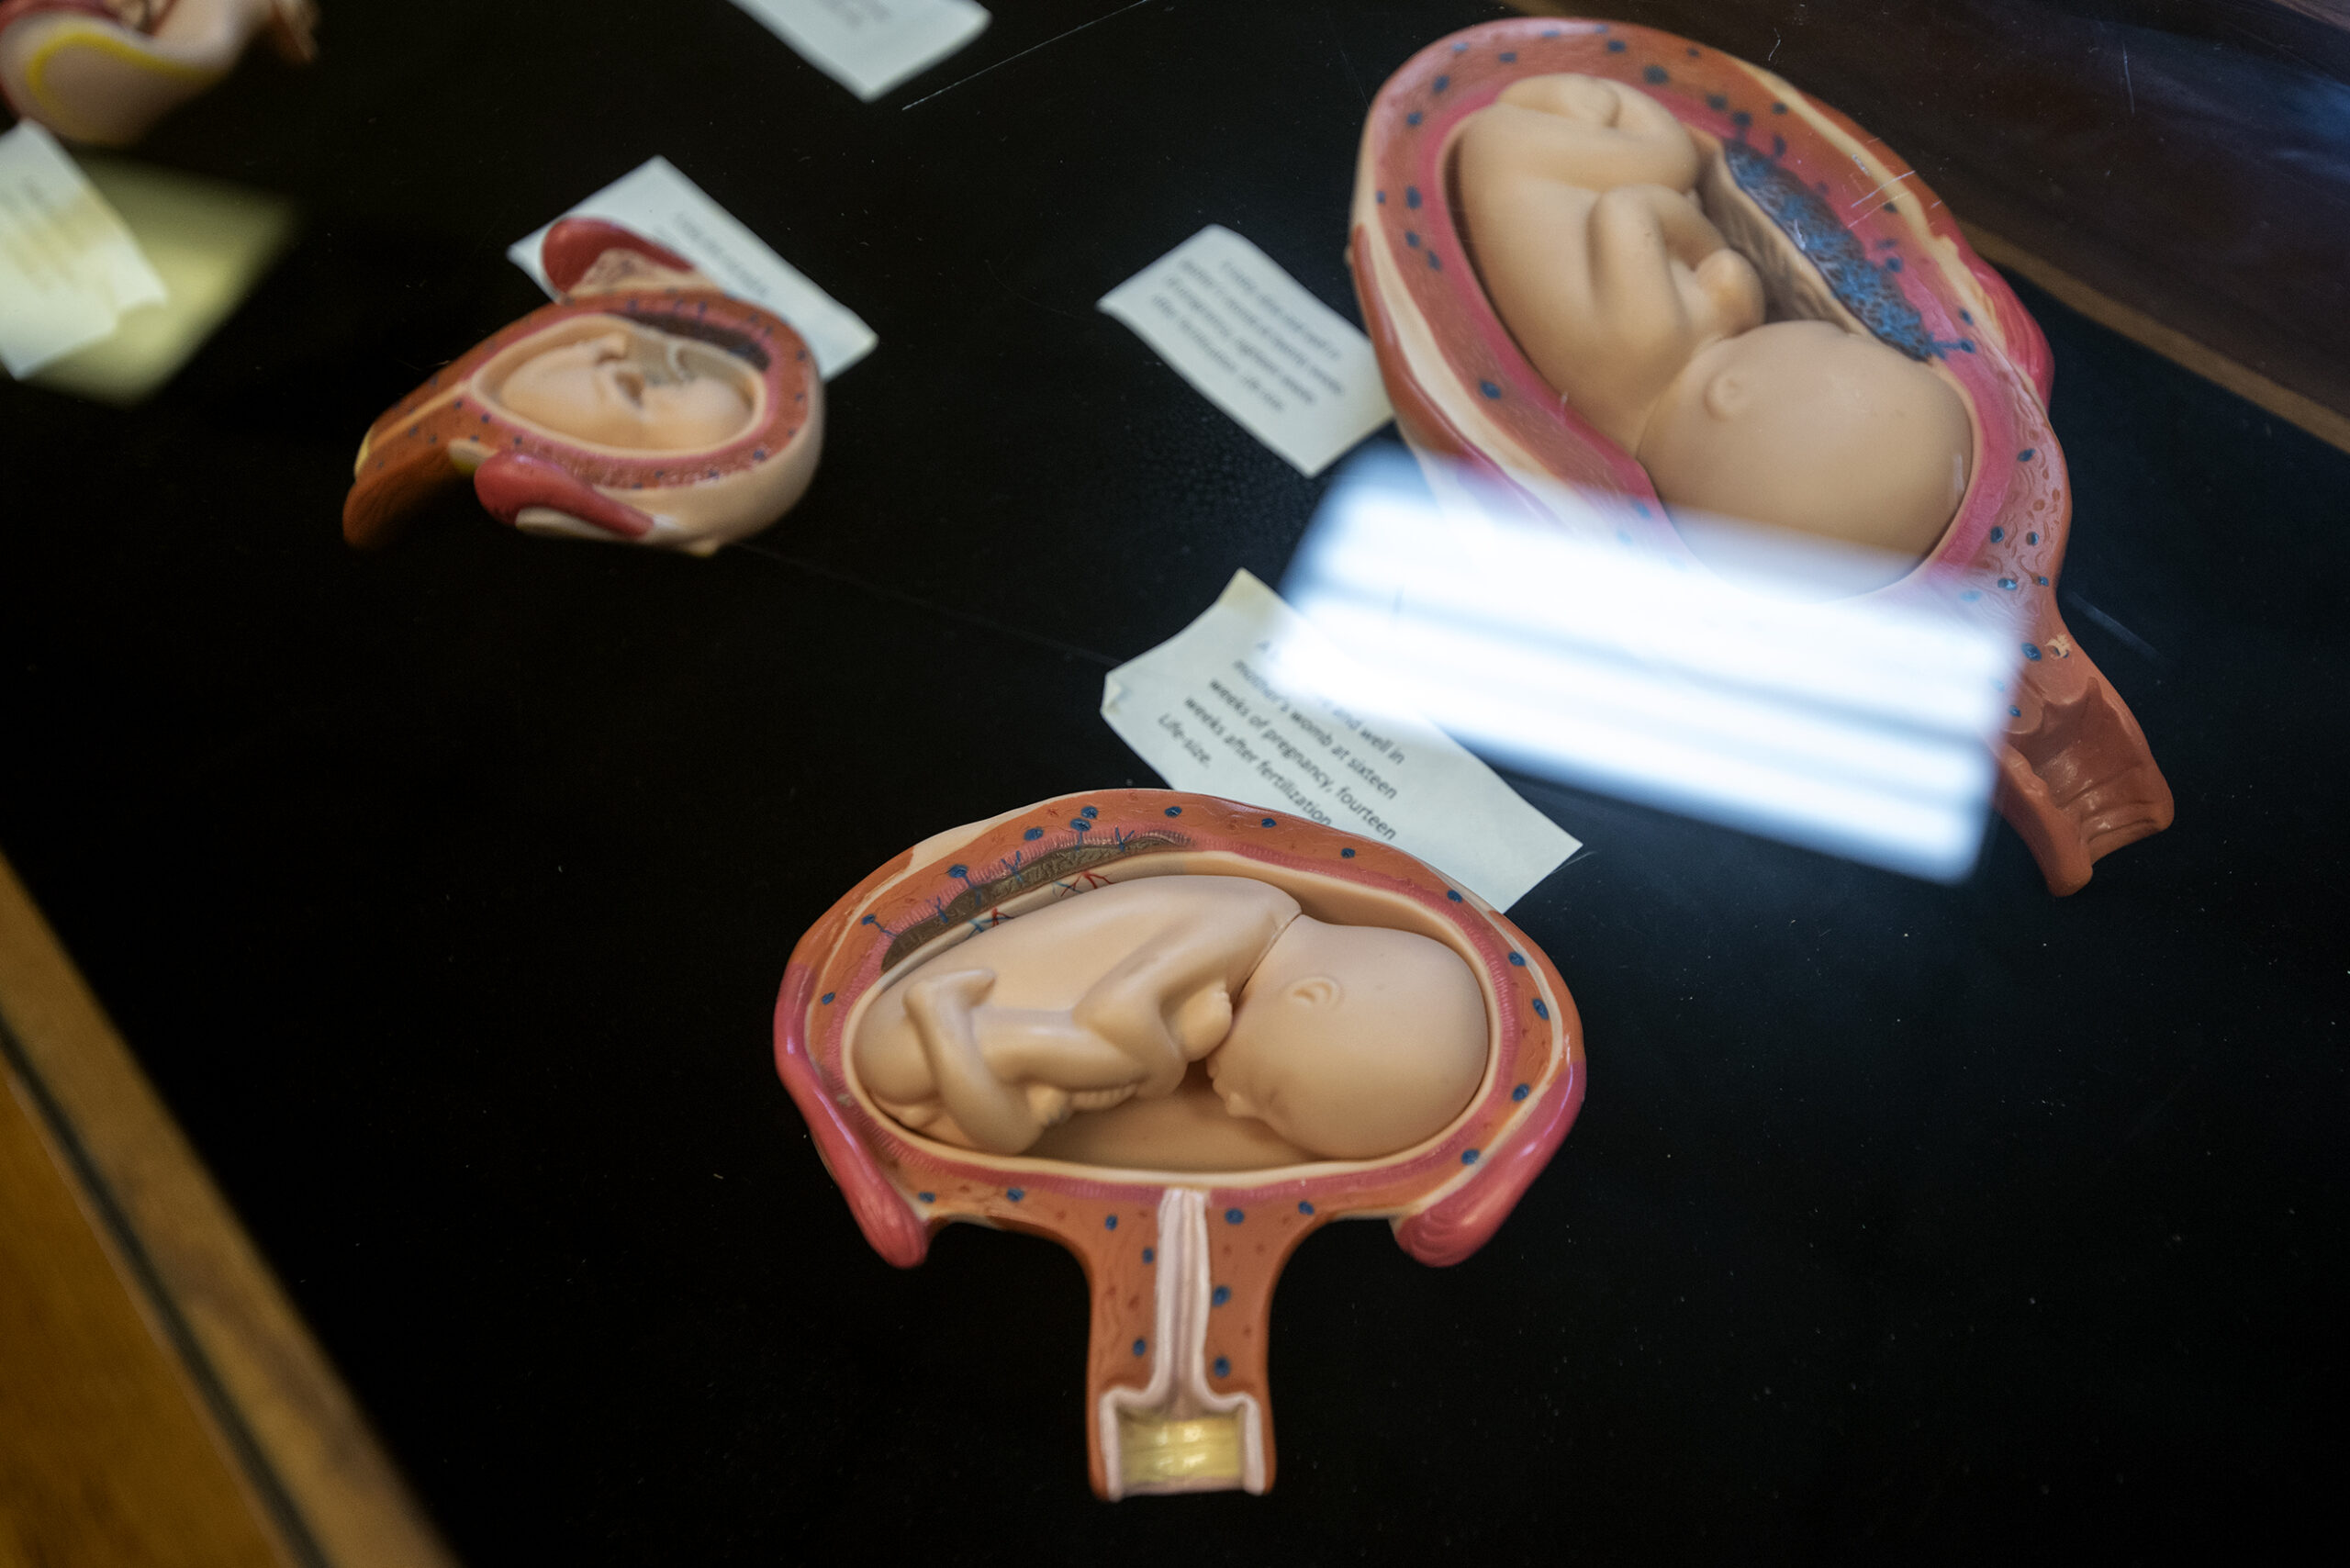 Figurines of a fetus at various stages of development are shown under a piece of glass.